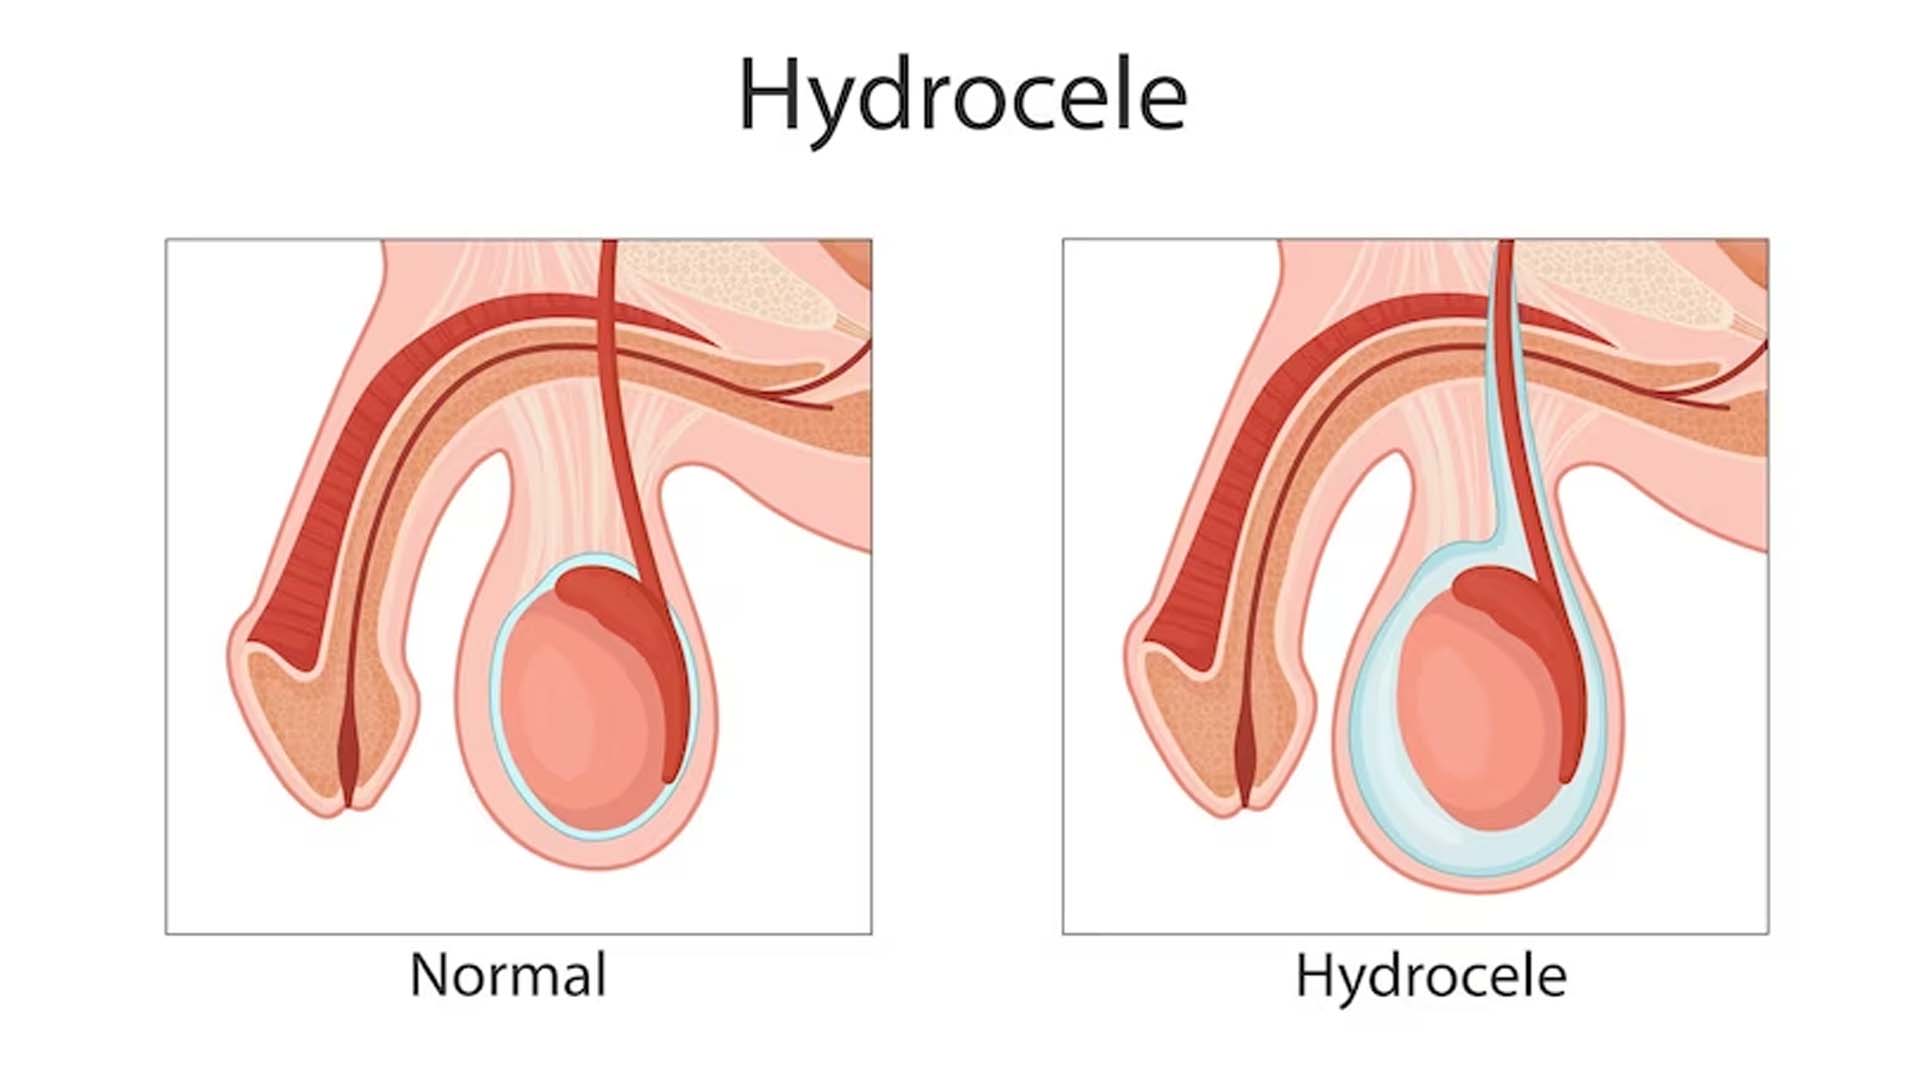 What are the Home Remedies for Hydrocele?